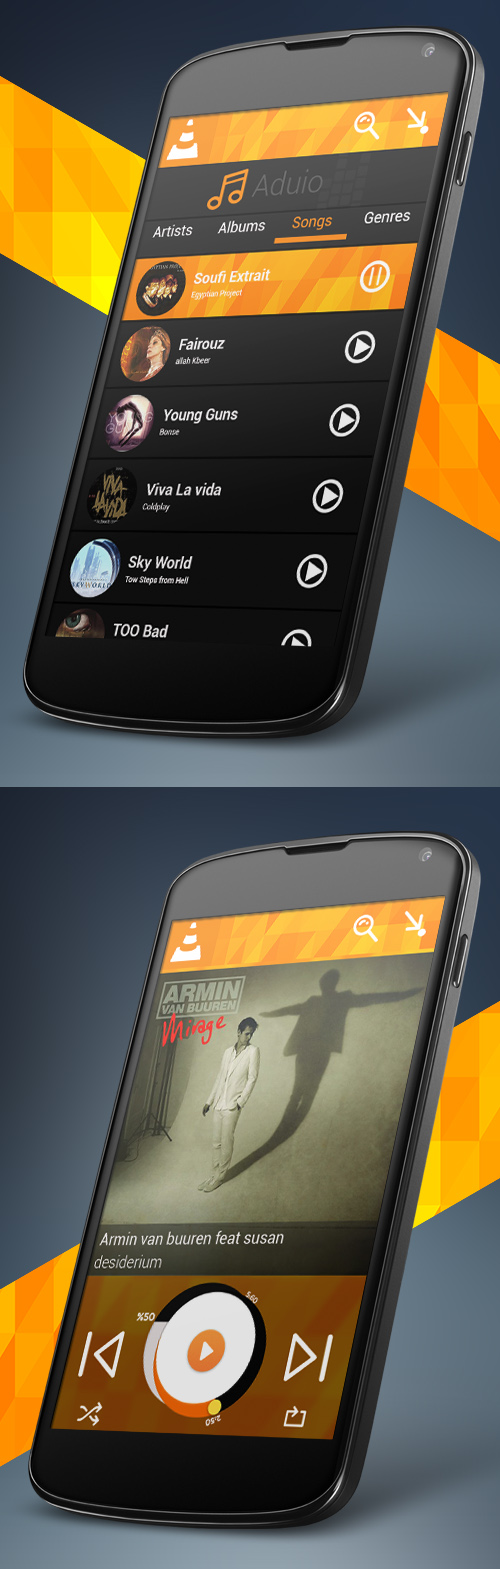 Mobile App UI Designs with Amazing User Experience